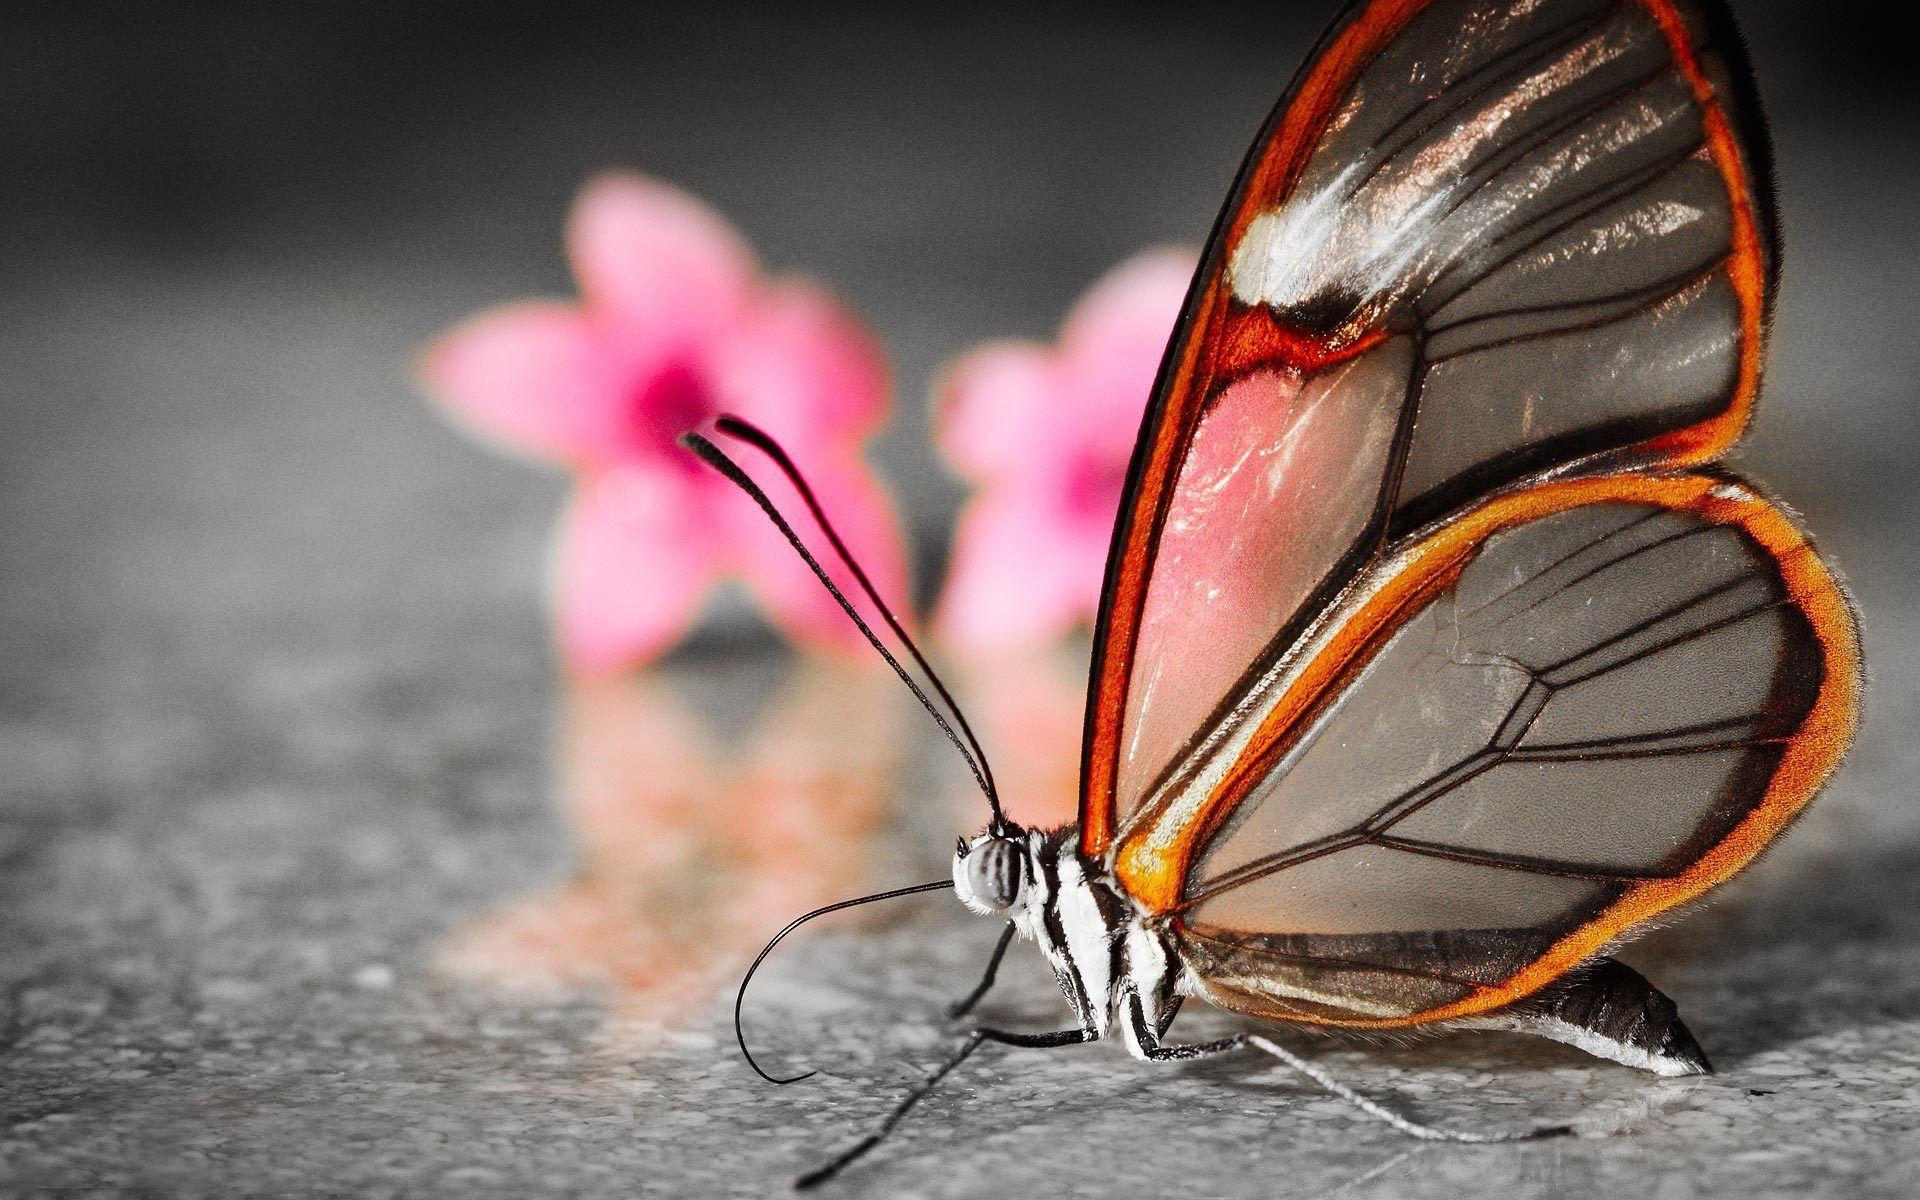 Download the Rare Butterfly Wallpaper, Rare Butterfly iPhone